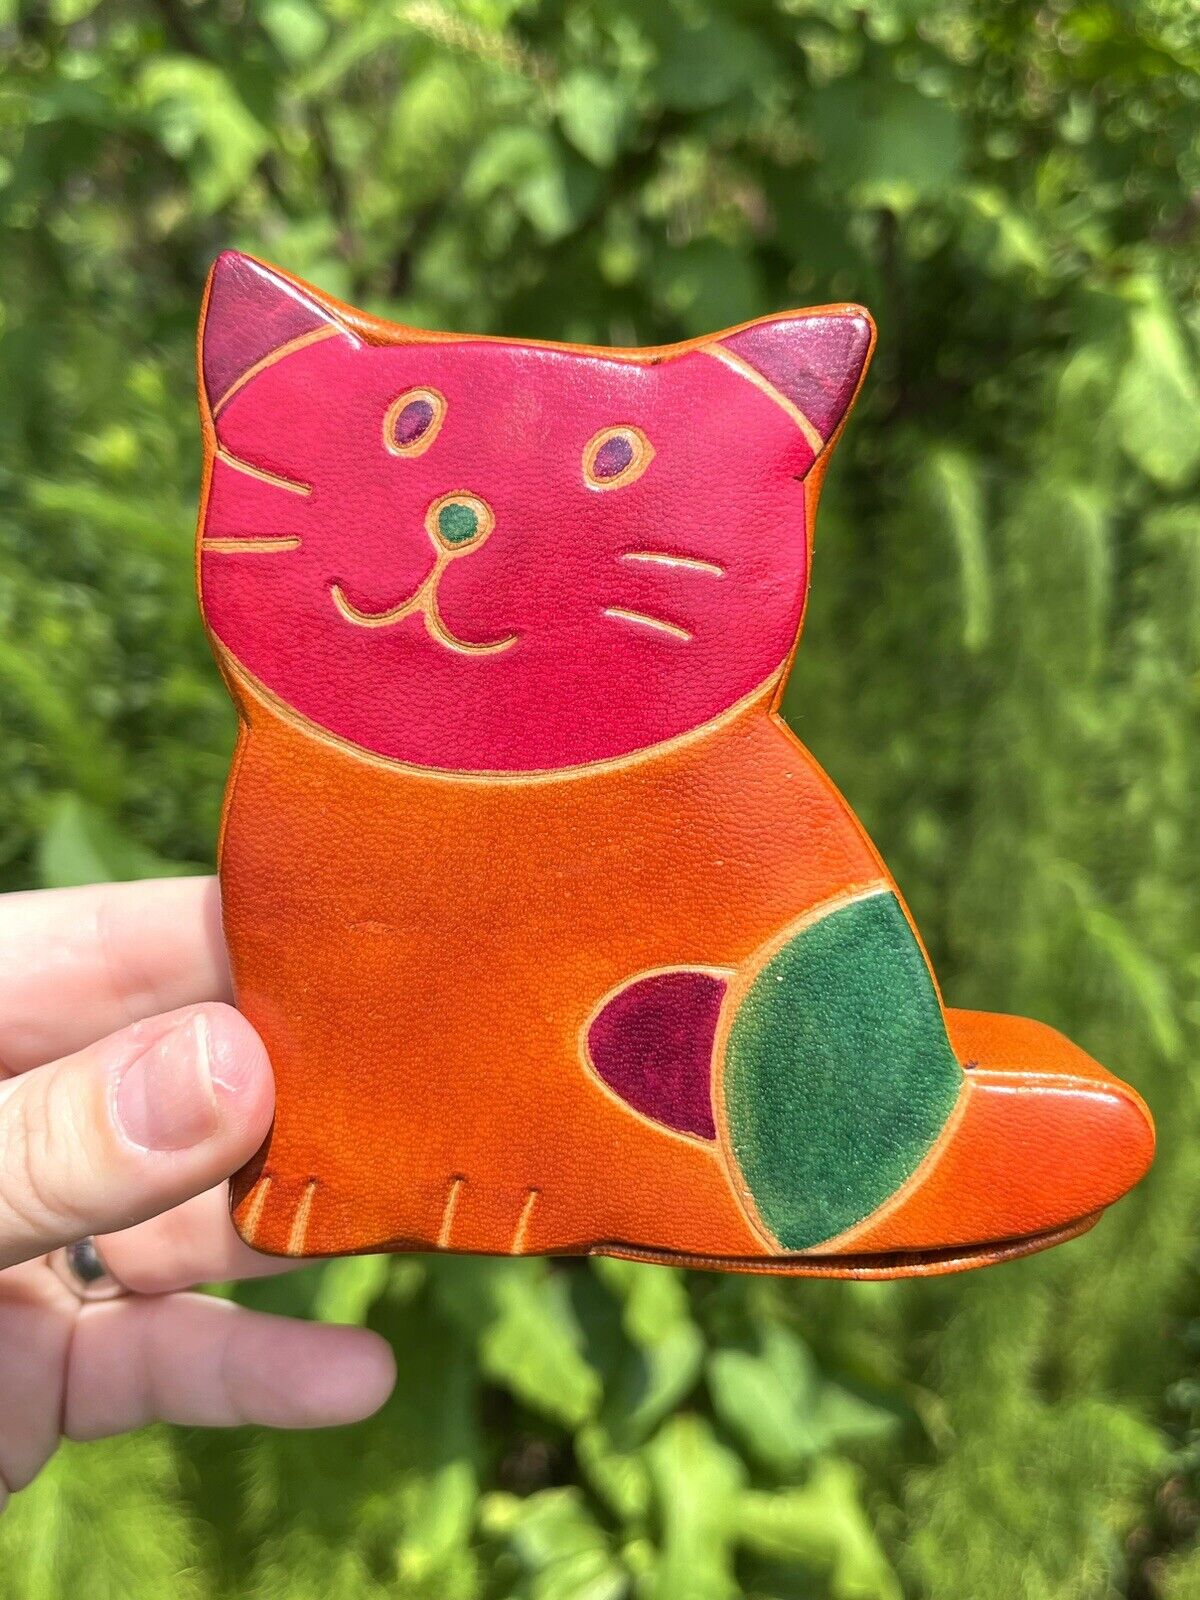 Vintage Leather Cat Coin Bank 90s - 4”x 4”